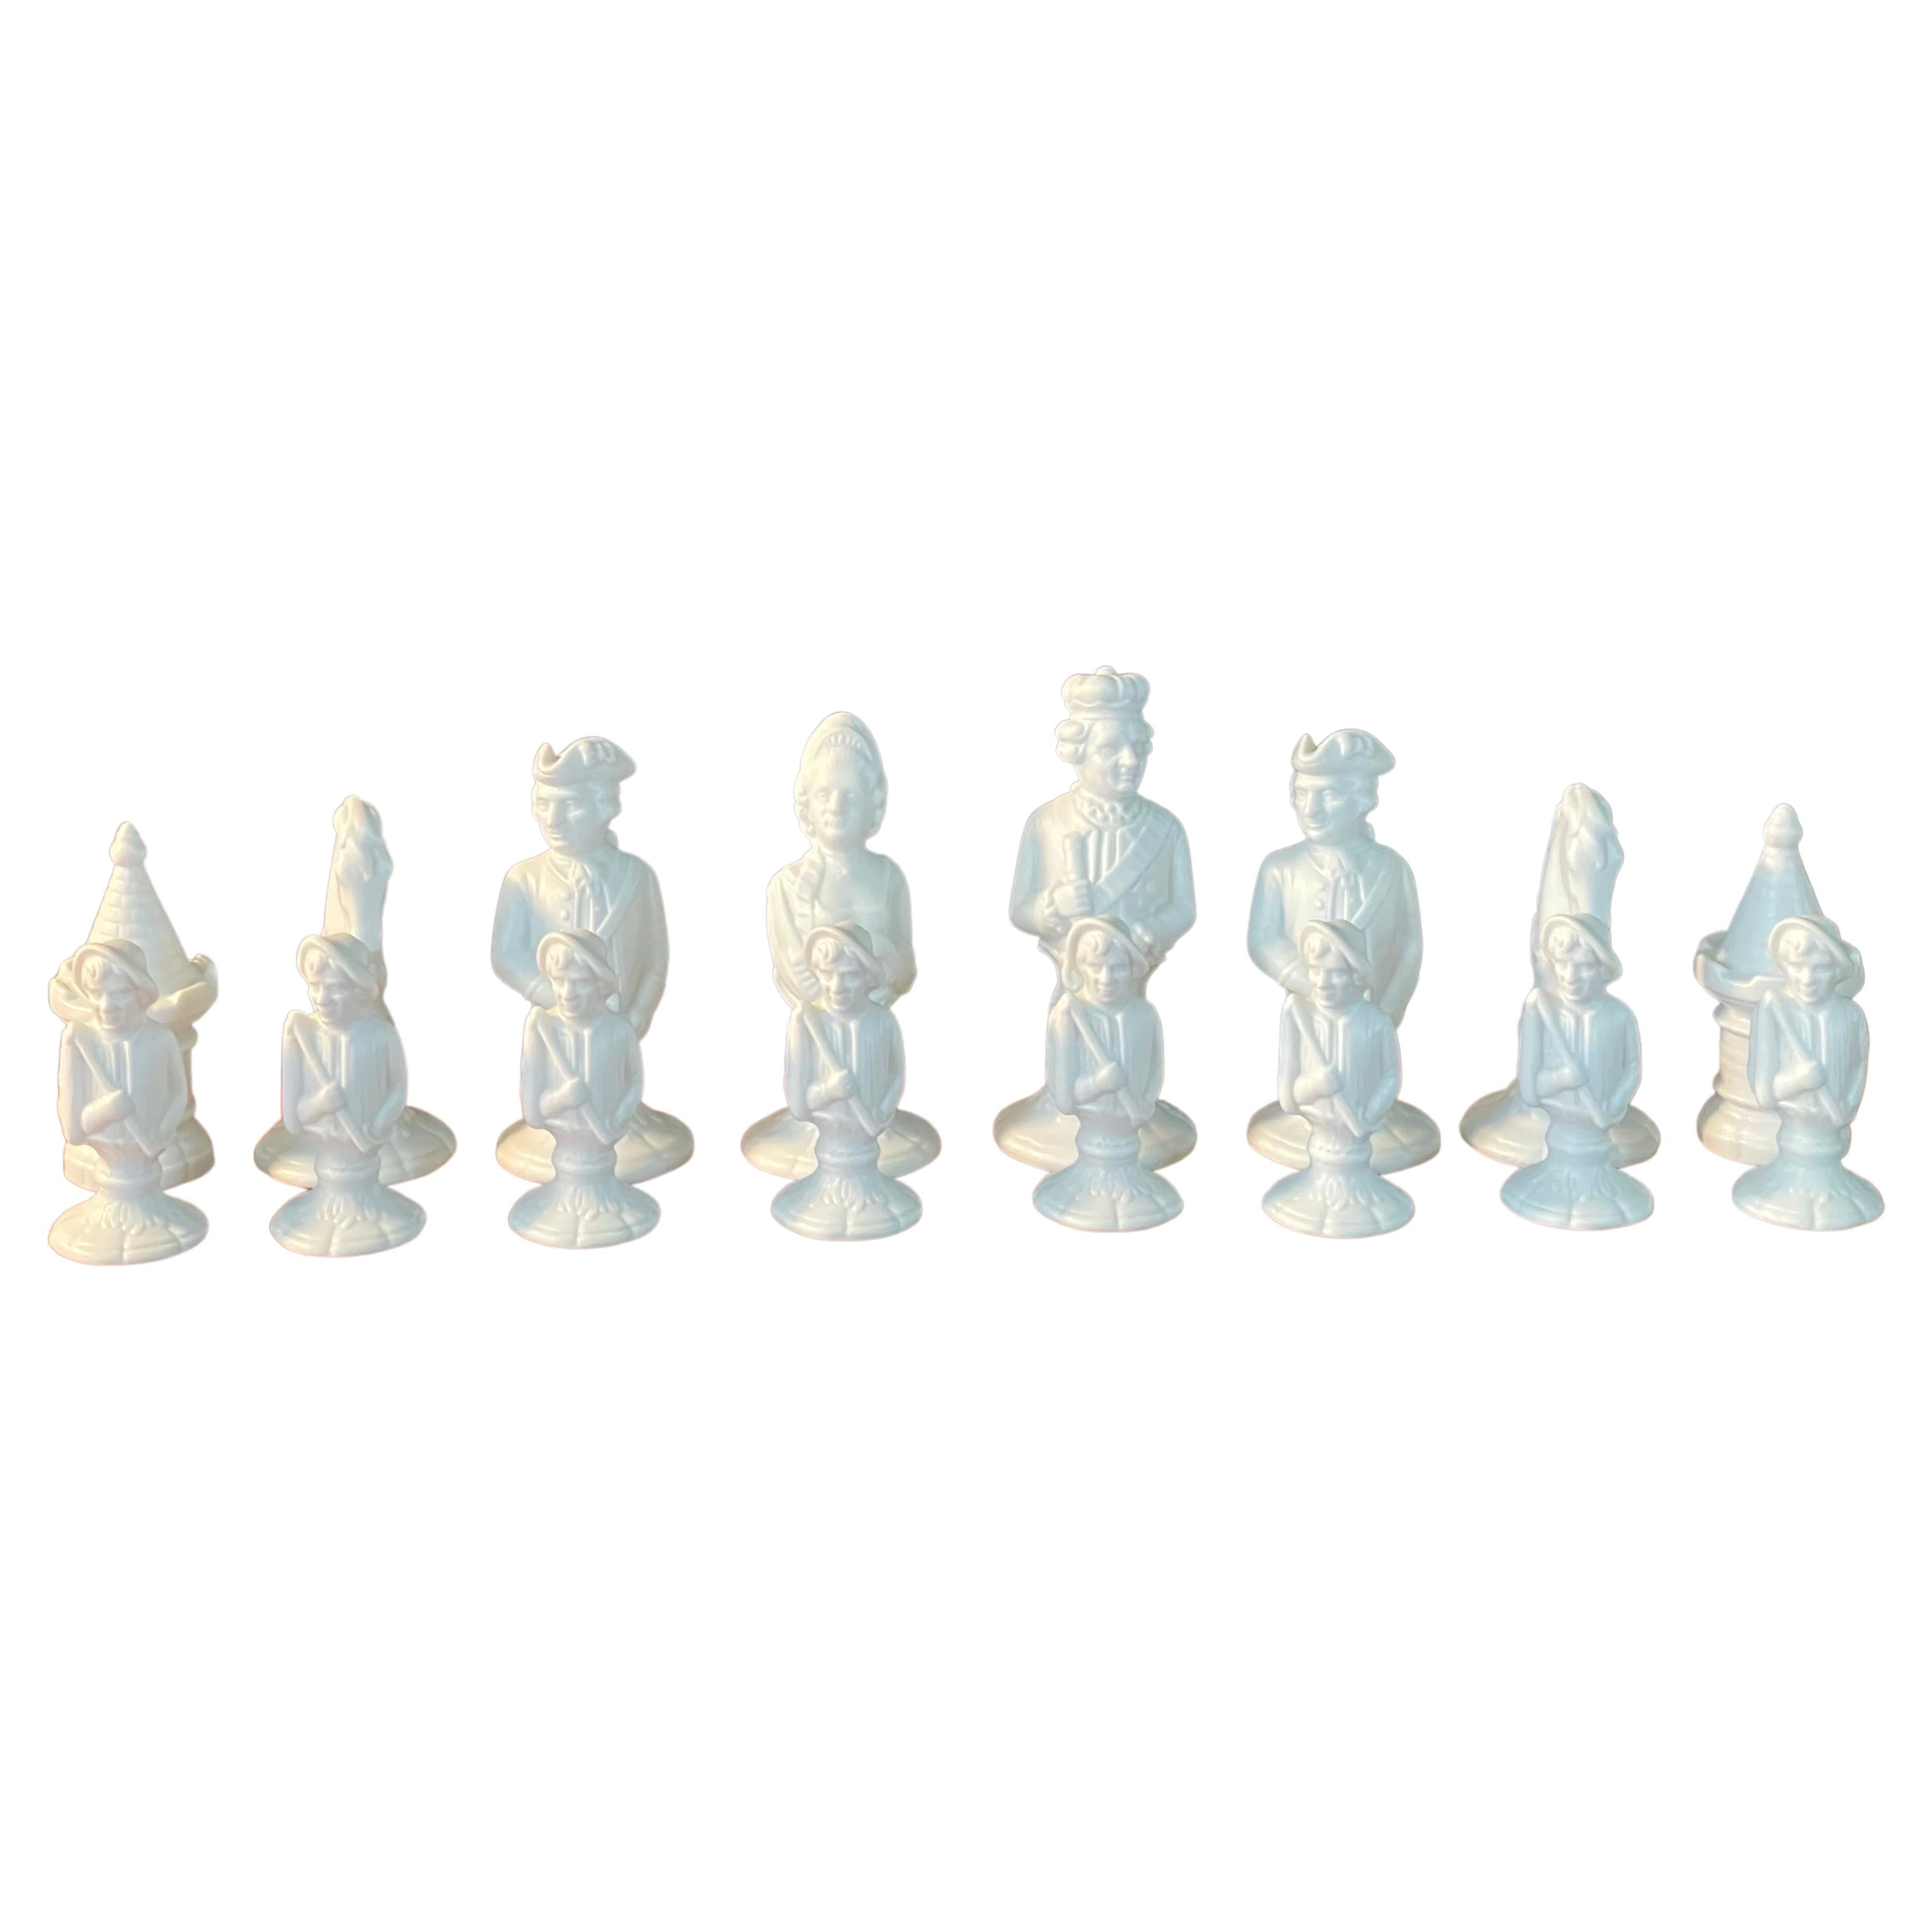 Beautiful and rare bisque porcelain chess set “Made in Germany” by Fürstenberg Porcelain, circa 1947. The castings were made from the original 18th century molds to commemorate 200th year anniversary of the Furstenberg manufactory in 1947. They are